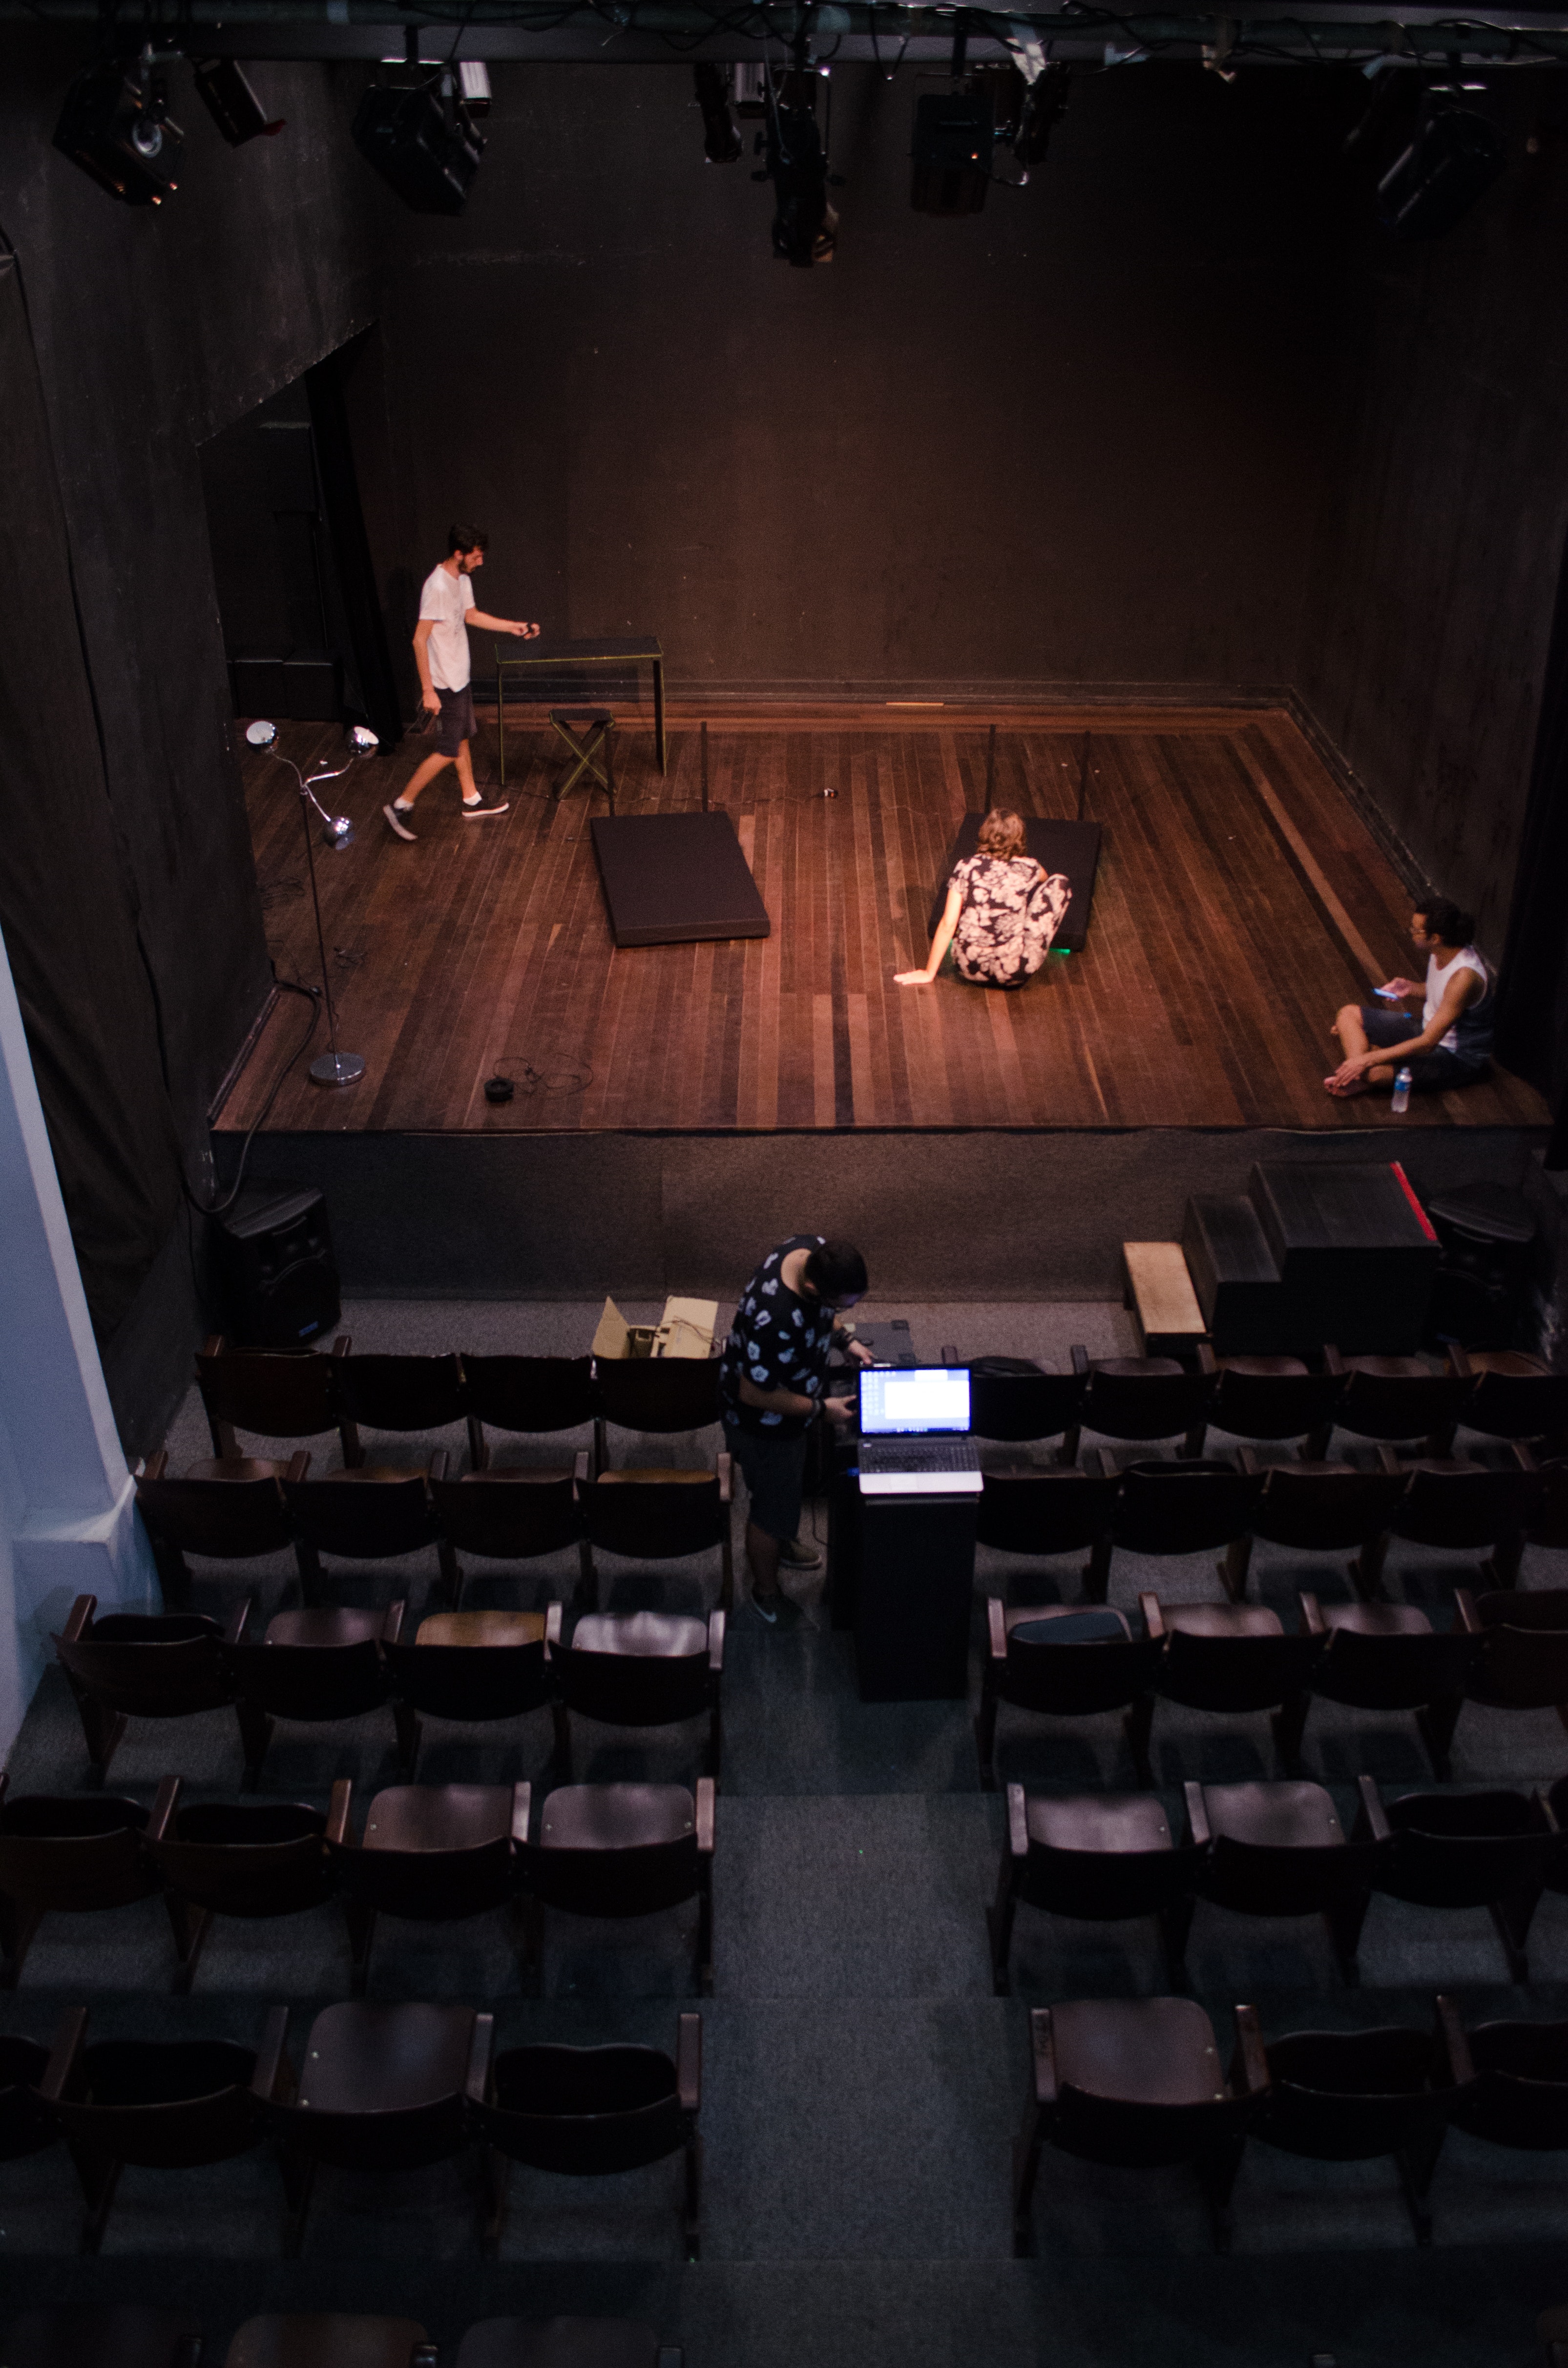 Actors preparing for a rehearsal of a play.